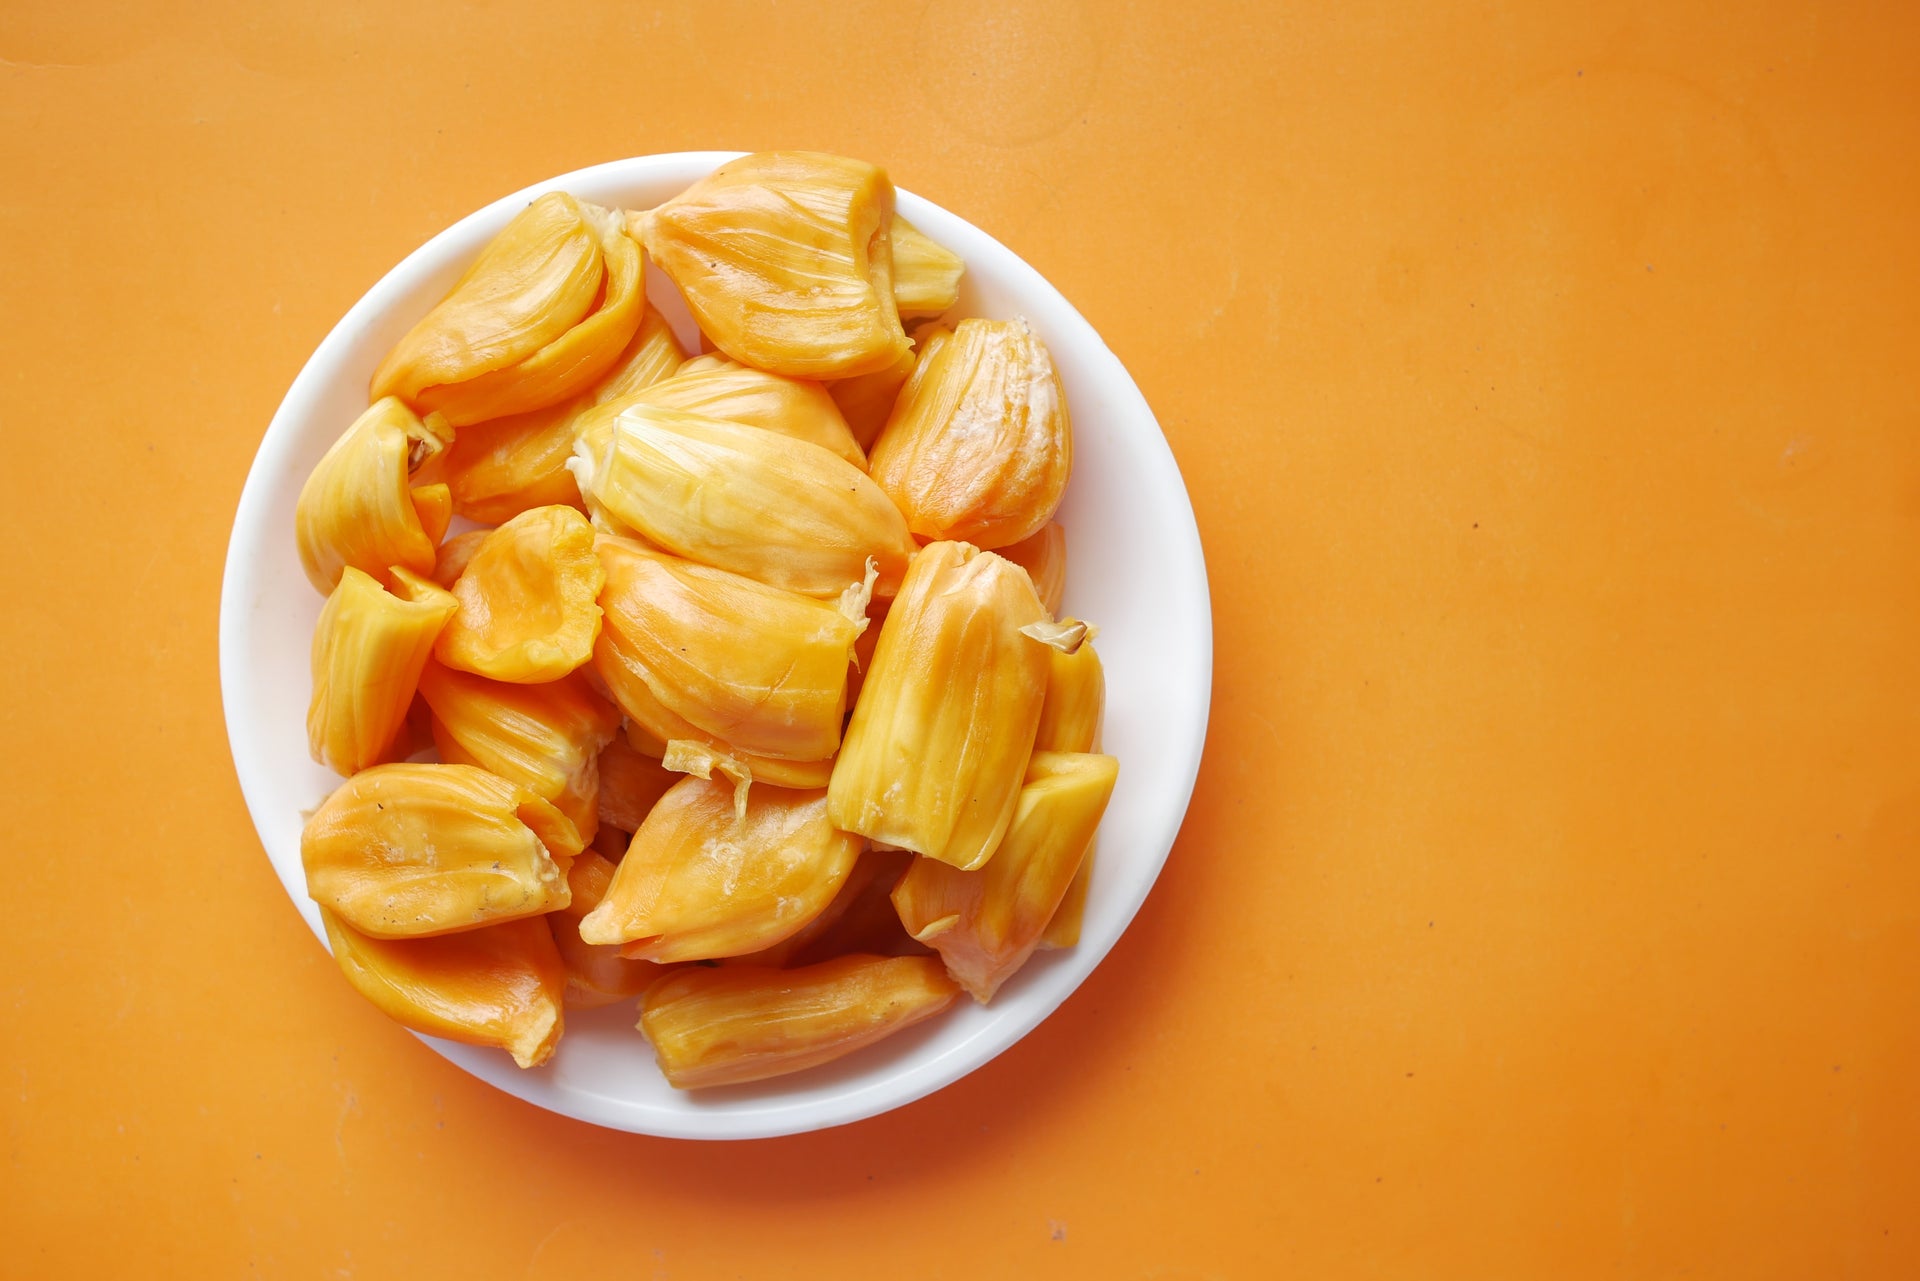 Jackfruit: What Is It, How to Identify, Buy One and Eat!